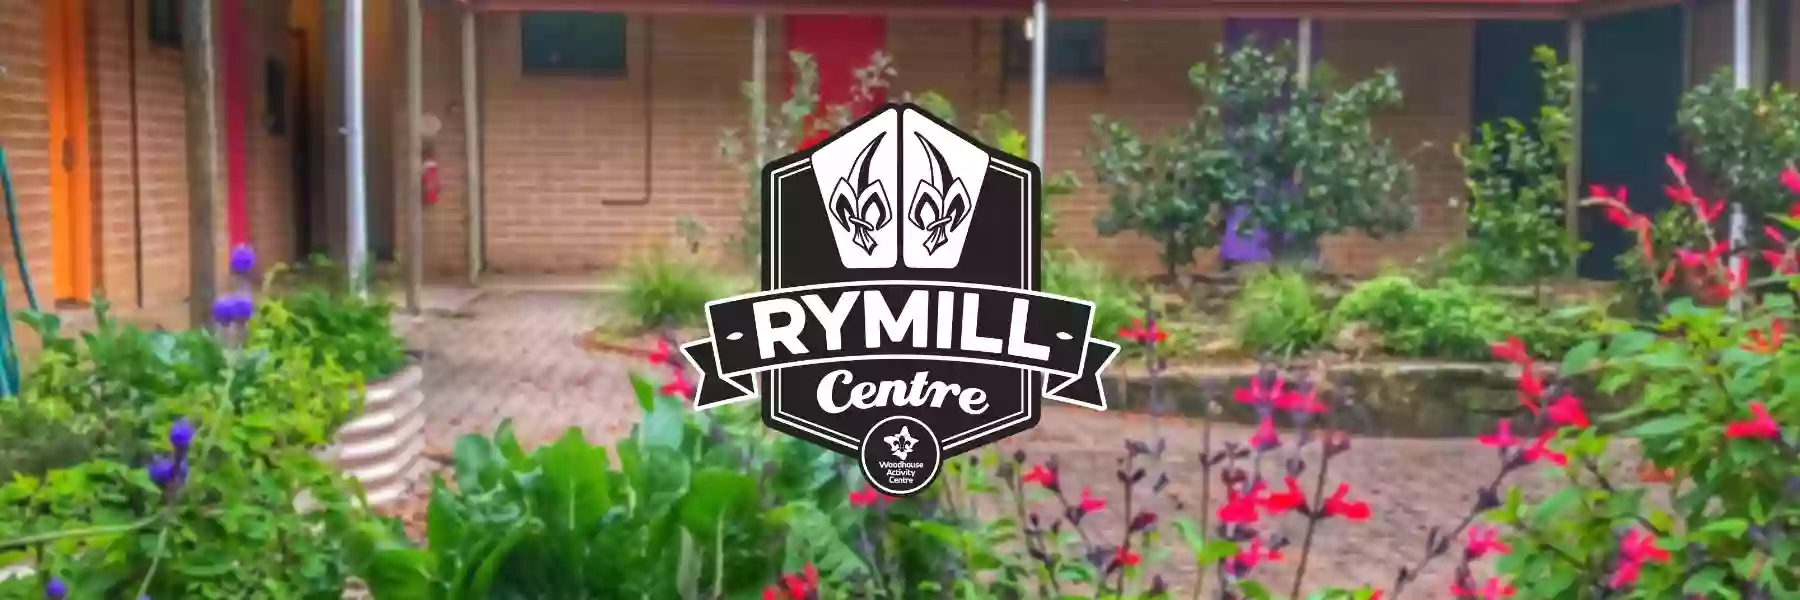 Rymill Centre - Woodhouse Adventure Park